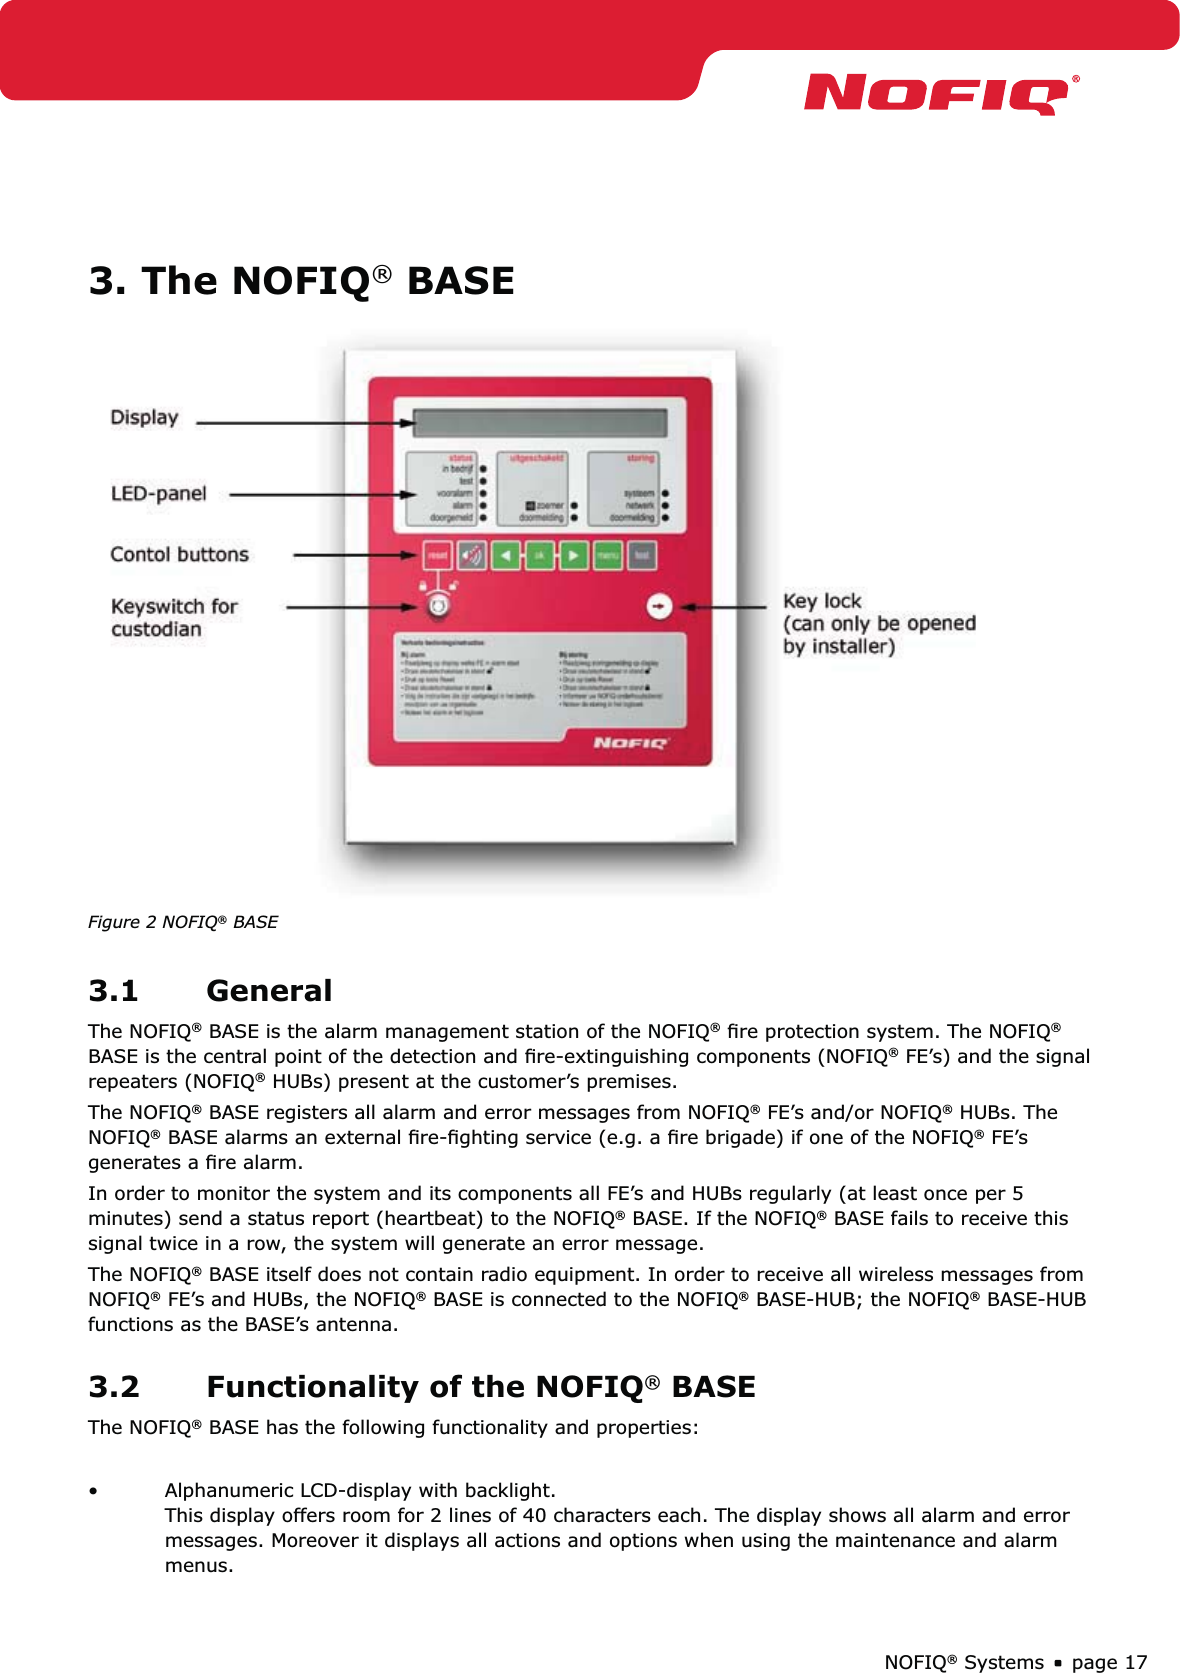 page 17NOFIQ® Systems3. The NOFIQ® BASEFigure 2 NOFIQ® BASE3.1 GeneralThe NOFIQ® BASE is the alarm management station of the NOFIQ® ﬁre protection system. The NOFIQ® BASE is the central point of the detection and ﬁre-extinguishing components (NOFIQ® FE’s) and the signal repeaters (NOFIQ® HUBs) present at the customer’s premises. The NOFIQ® BASE registers all alarm and error messages from NOFIQ® FE’s and/or NOFIQ® HUBs. The NOFIQ® BASE alarms an external ﬁre-ﬁghting service (e.g. a ﬁre brigade) if one of the NOFIQ® FE’s generates a ﬁre alarm. In order to monitor the system and its components all FE’s and HUBs regularly (at least once per 5 minutes) send a status report (heartbeat) to the NOFIQ® BASE. If the NOFIQ® BASE fails to receive this signal twice in a row, the system will generate an error message.The NOFIQ® BASE itself does not contain radio equipment. In order to receive all wireless messages from NOFIQ® FE’s and HUBs, the NOFIQ® BASE is connected to the NOFIQ® BASE-HUB; the NOFIQ® BASE-HUB functions as the BASE’s antenna.3.2  Functionality of the NOFIQ® BASEThe NOFIQ® BASE has the following functionality and properties:Alphanumeric LCD-display with backlight.  • This display offers room for 2 lines of 40 characters each. The display shows all alarm and error messages. Moreover it displays all actions and options when using the maintenance and alarm menus.